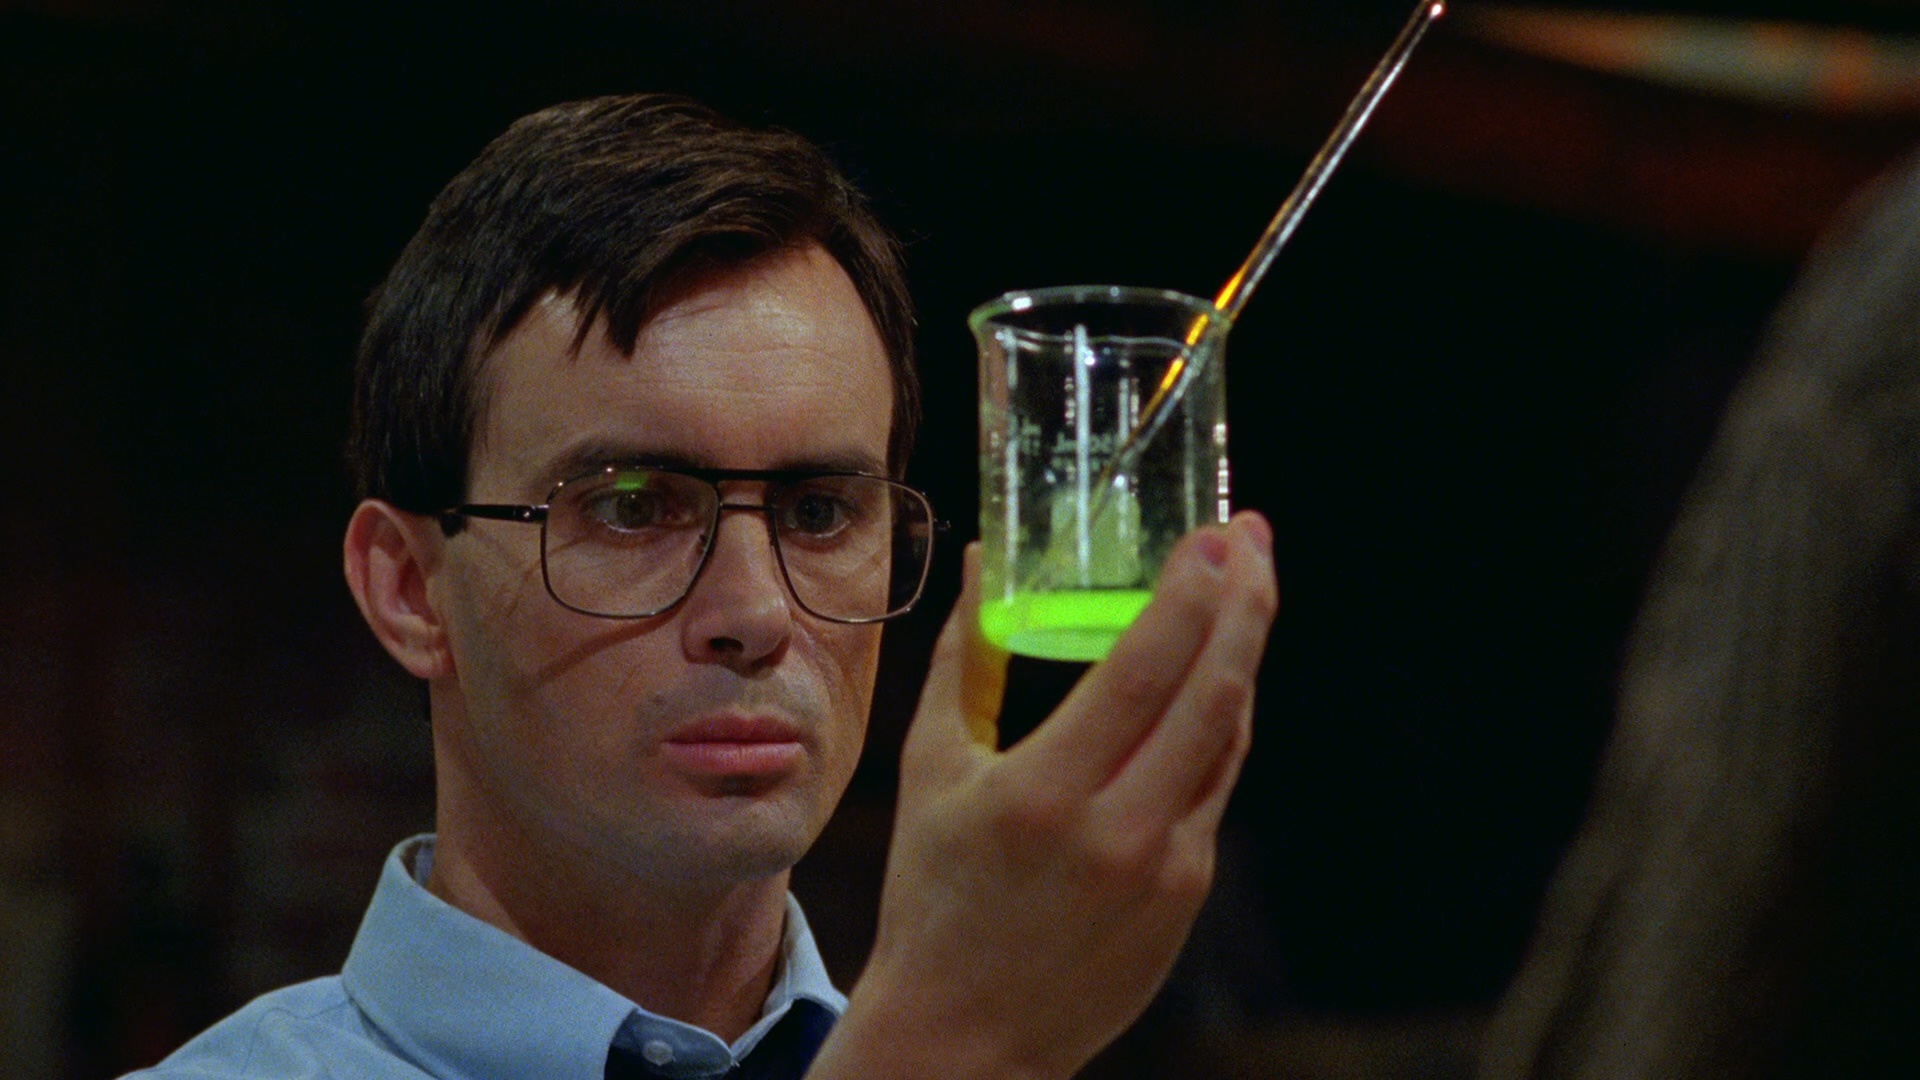 Images of Re-Animator | 1920x1080